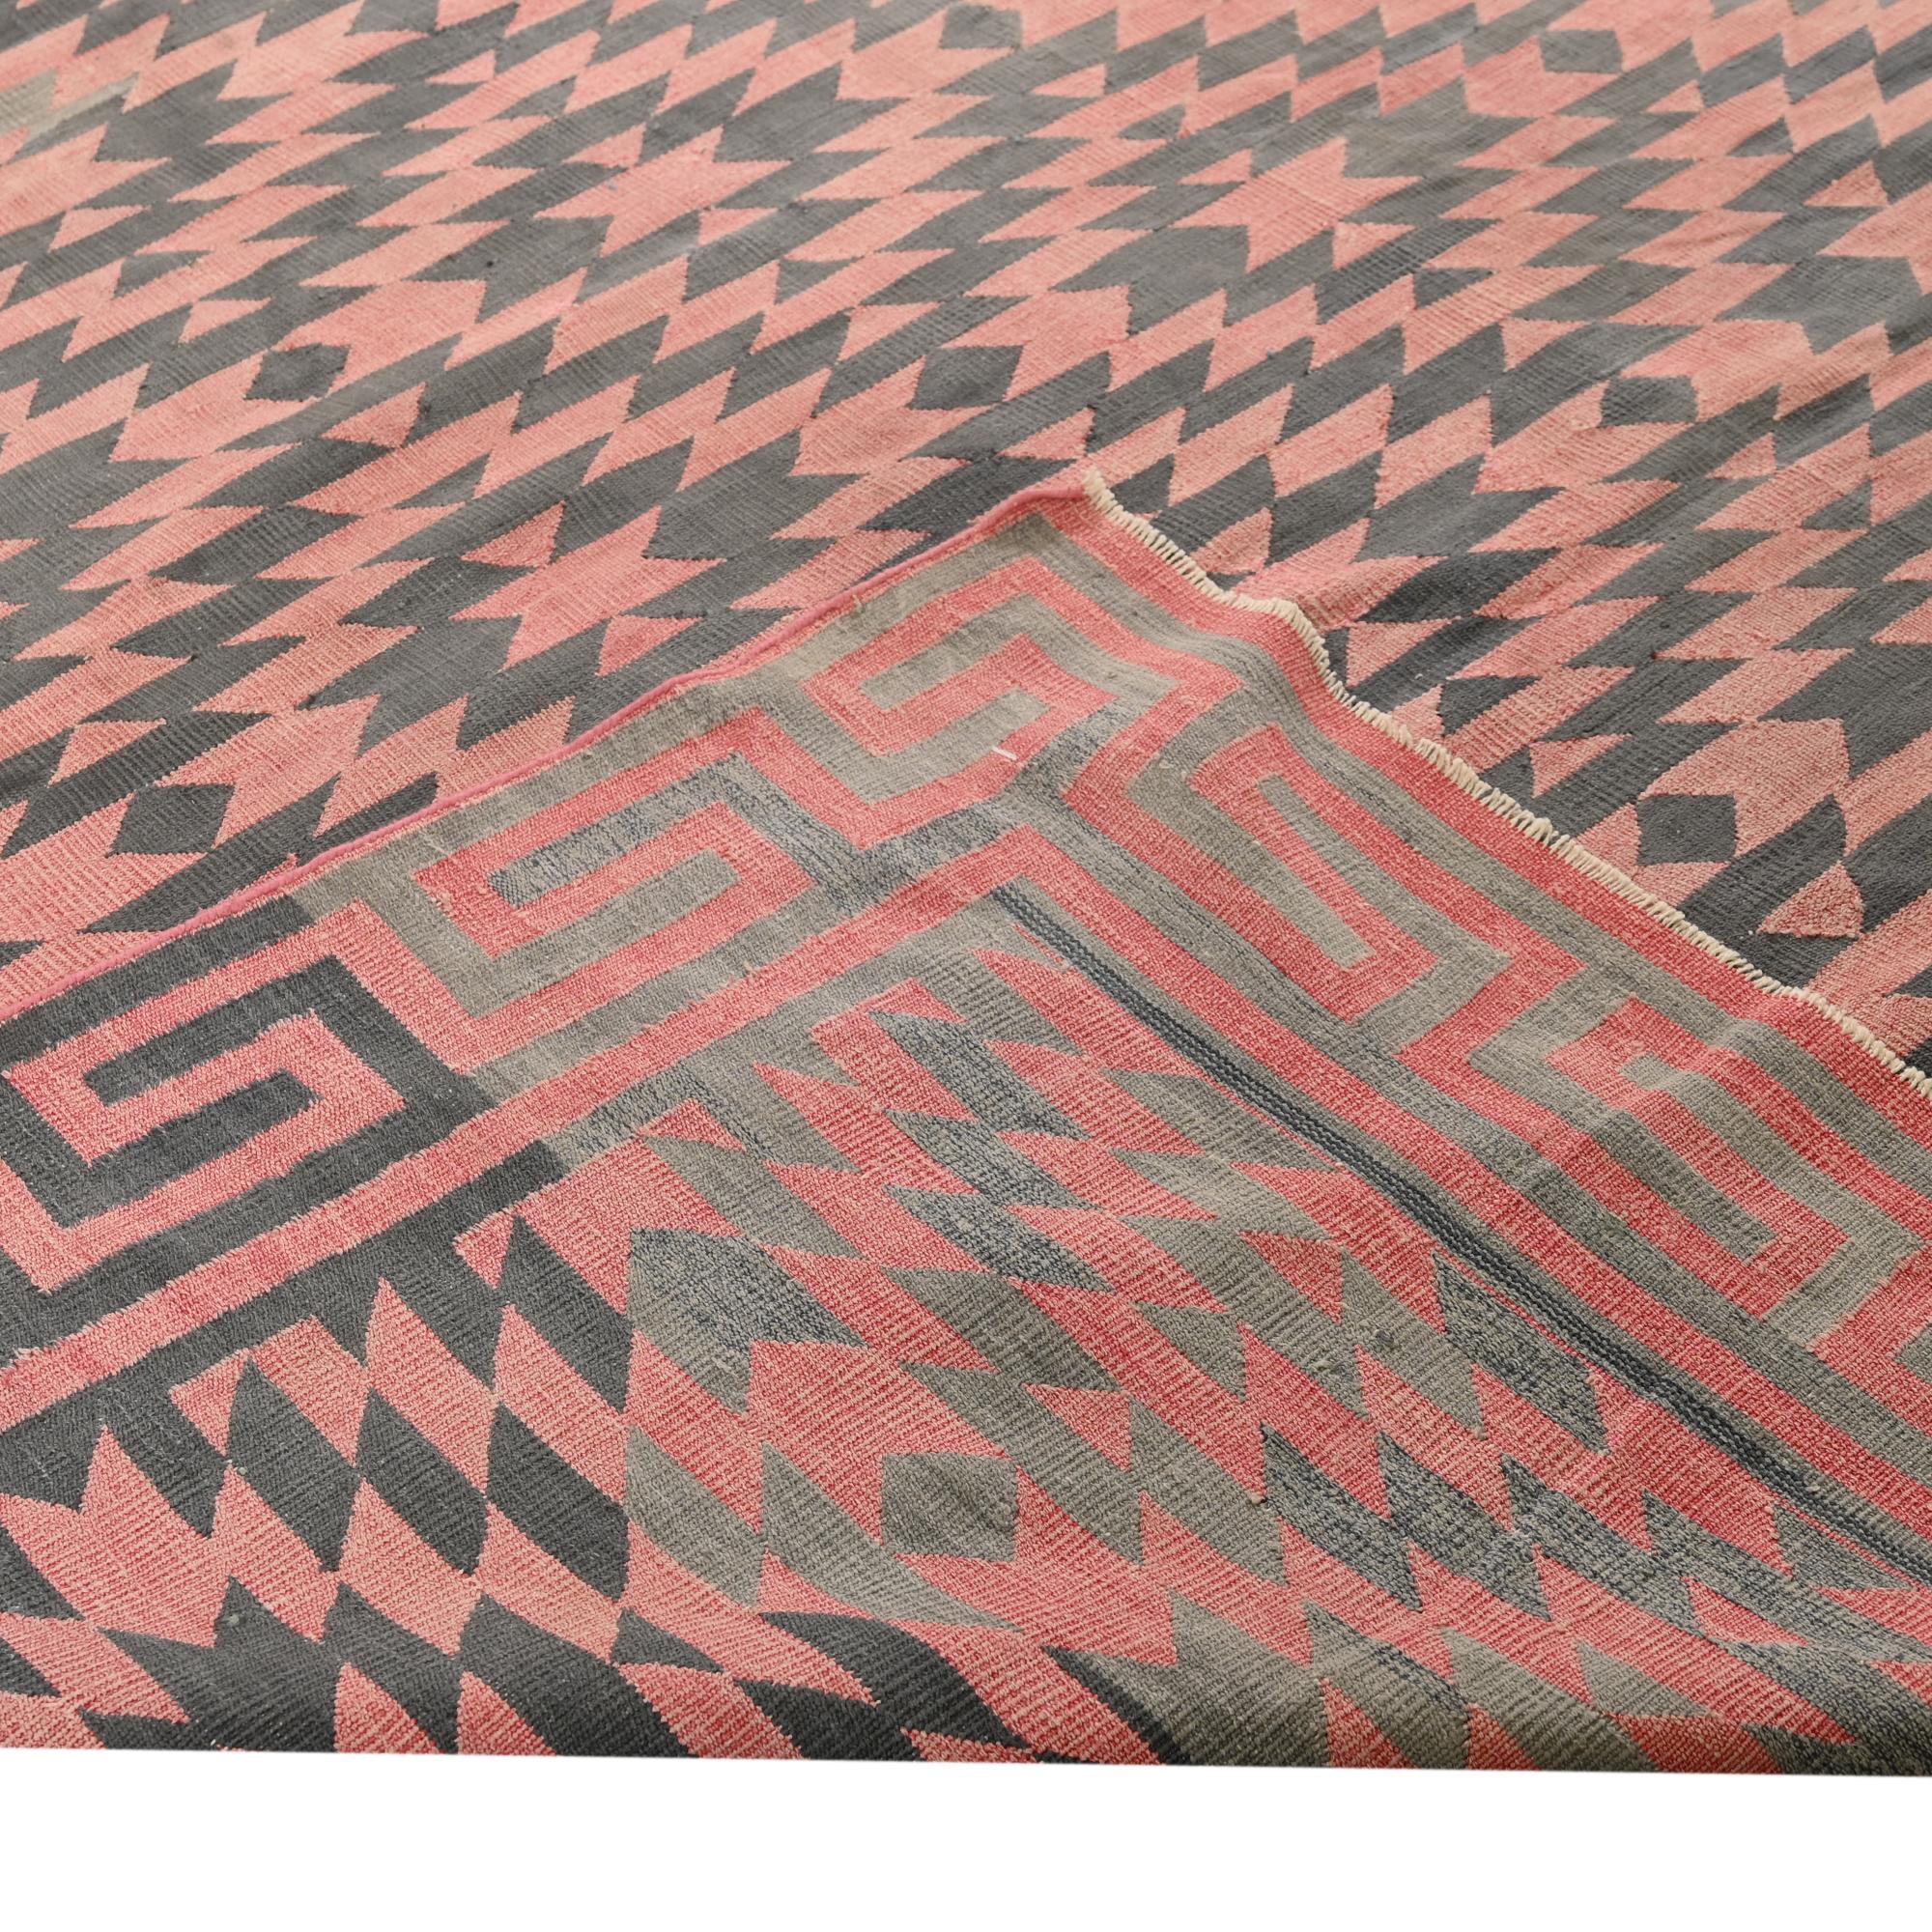 Vintage Dhurrie Flat Weave in Pink with Brown Geometric Patterns by Rug & Kilim In Good Condition For Sale In Long Island City, NY